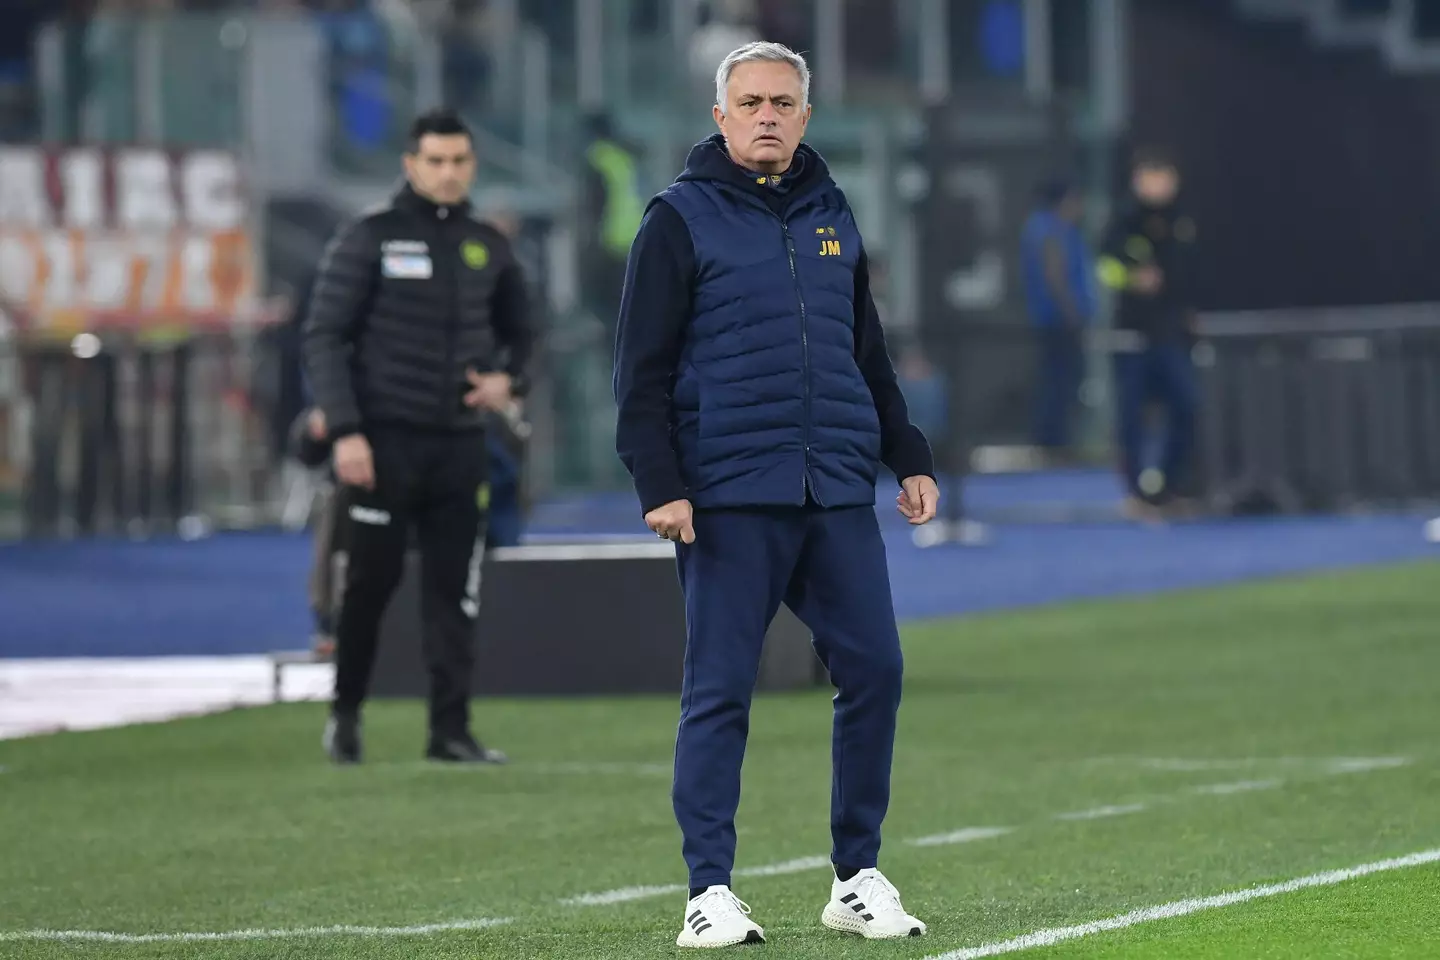 Mourinho on the touchline during Roma's 2-0 win over Fiorentina. (Image